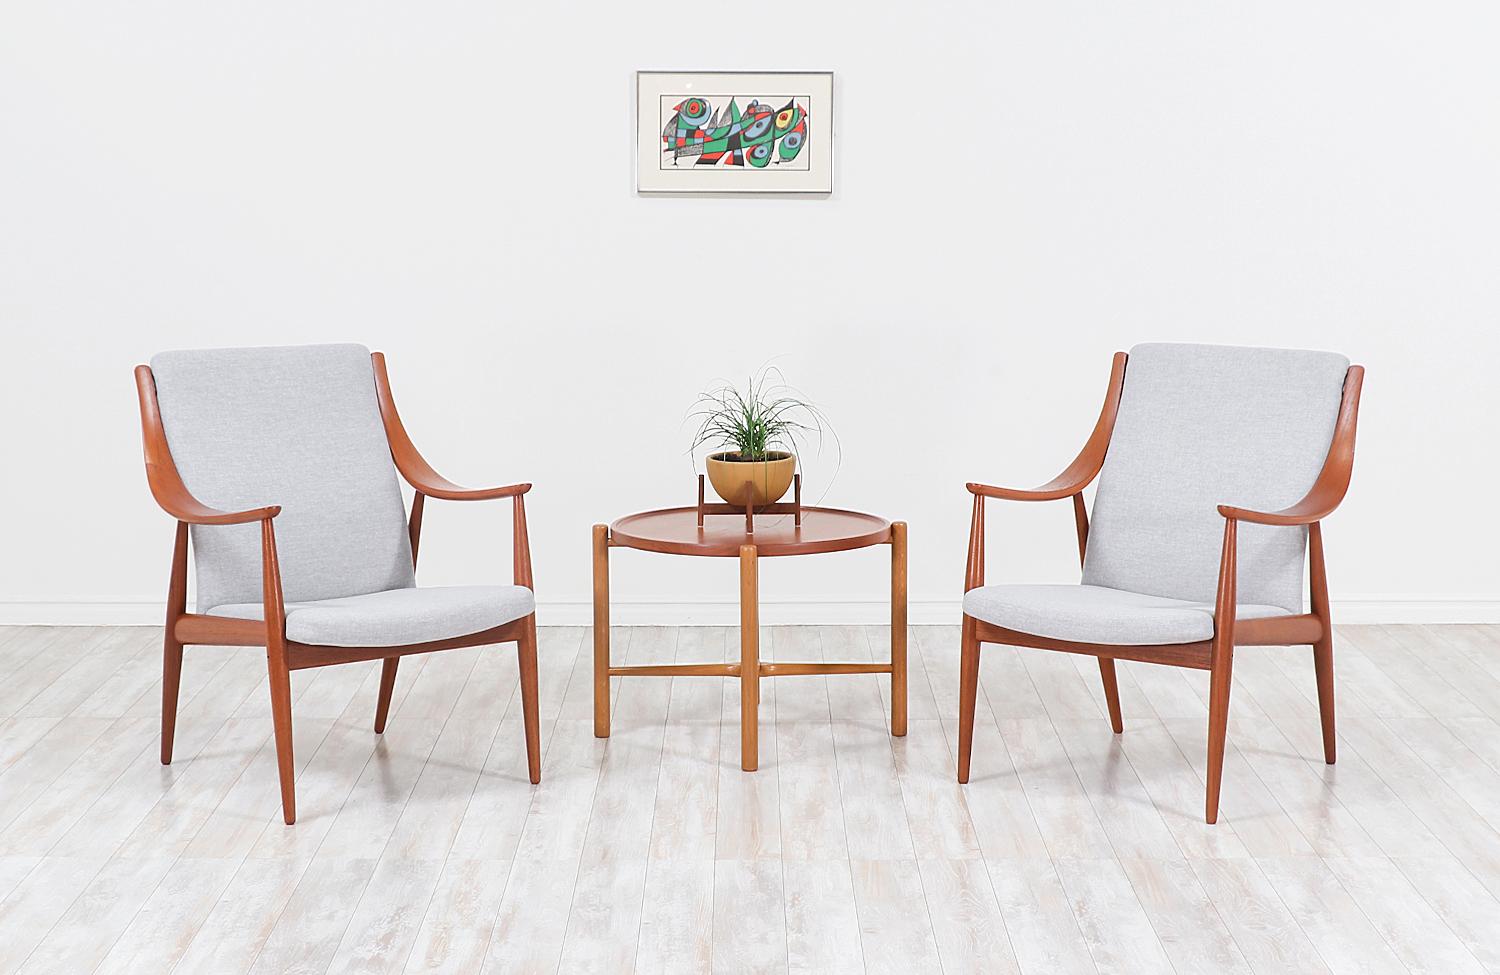 Pair of stunning Peter Hvidt & Orla Mølgaard-Nielsen lounge chairs designed for France & Søn in Denmark circa 1950s. This design uses quality teak wood and a few studio Craft techniques including laminated bentwood curvilinear arms and beautifully